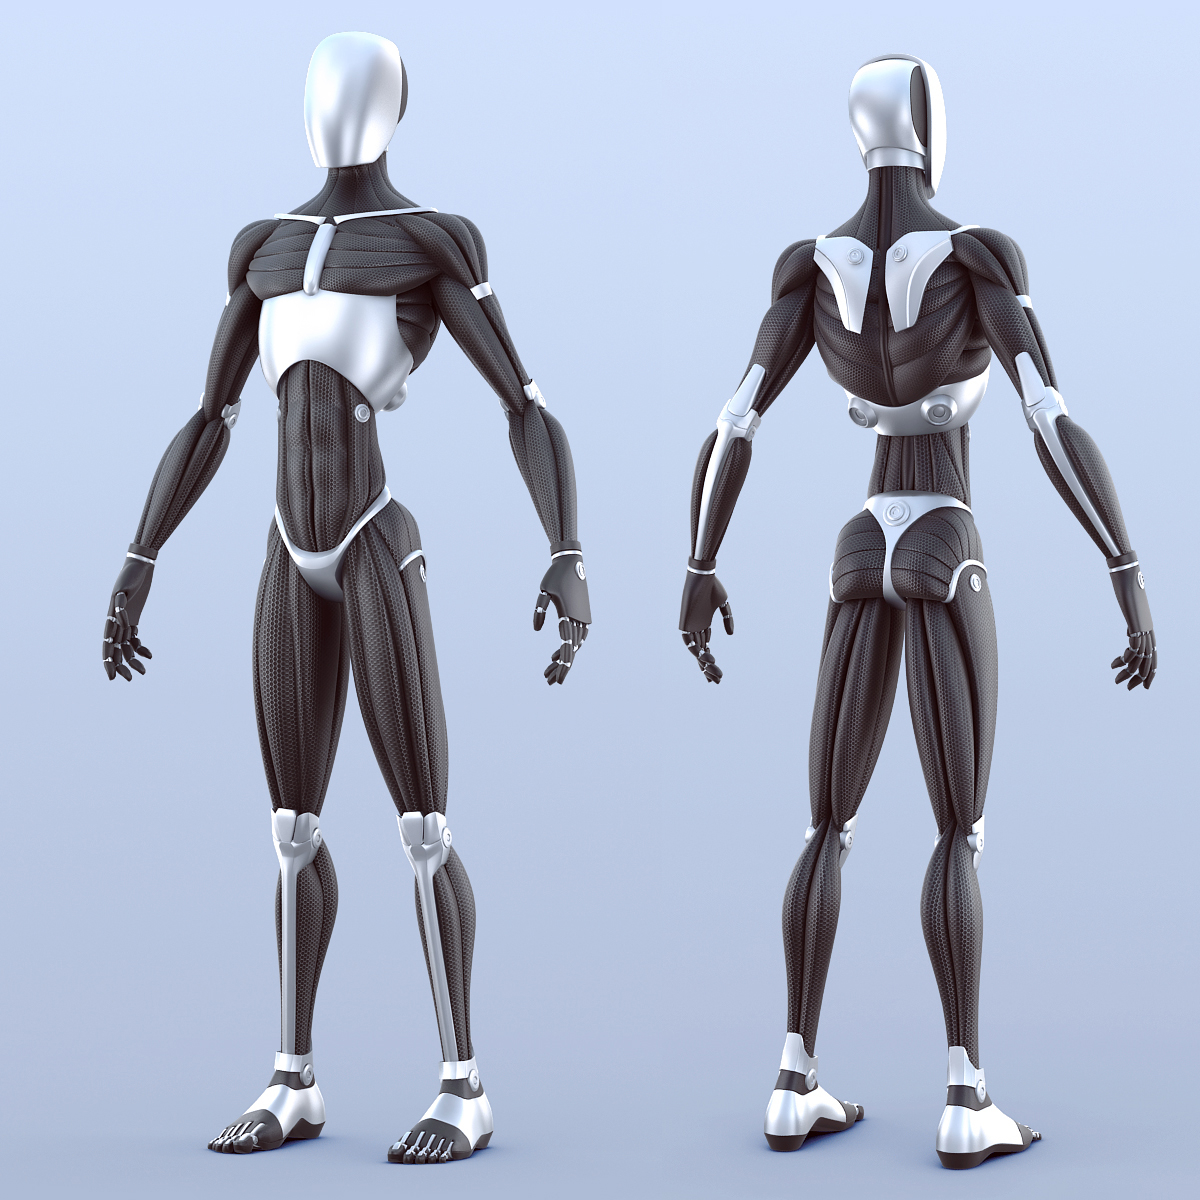 Ivo 00.jpgc08f2986 4320 4f70 8578 42759d0a3d92Zoom - 10 Humanoid Robots concept art We Can't Wait to See in Real Life